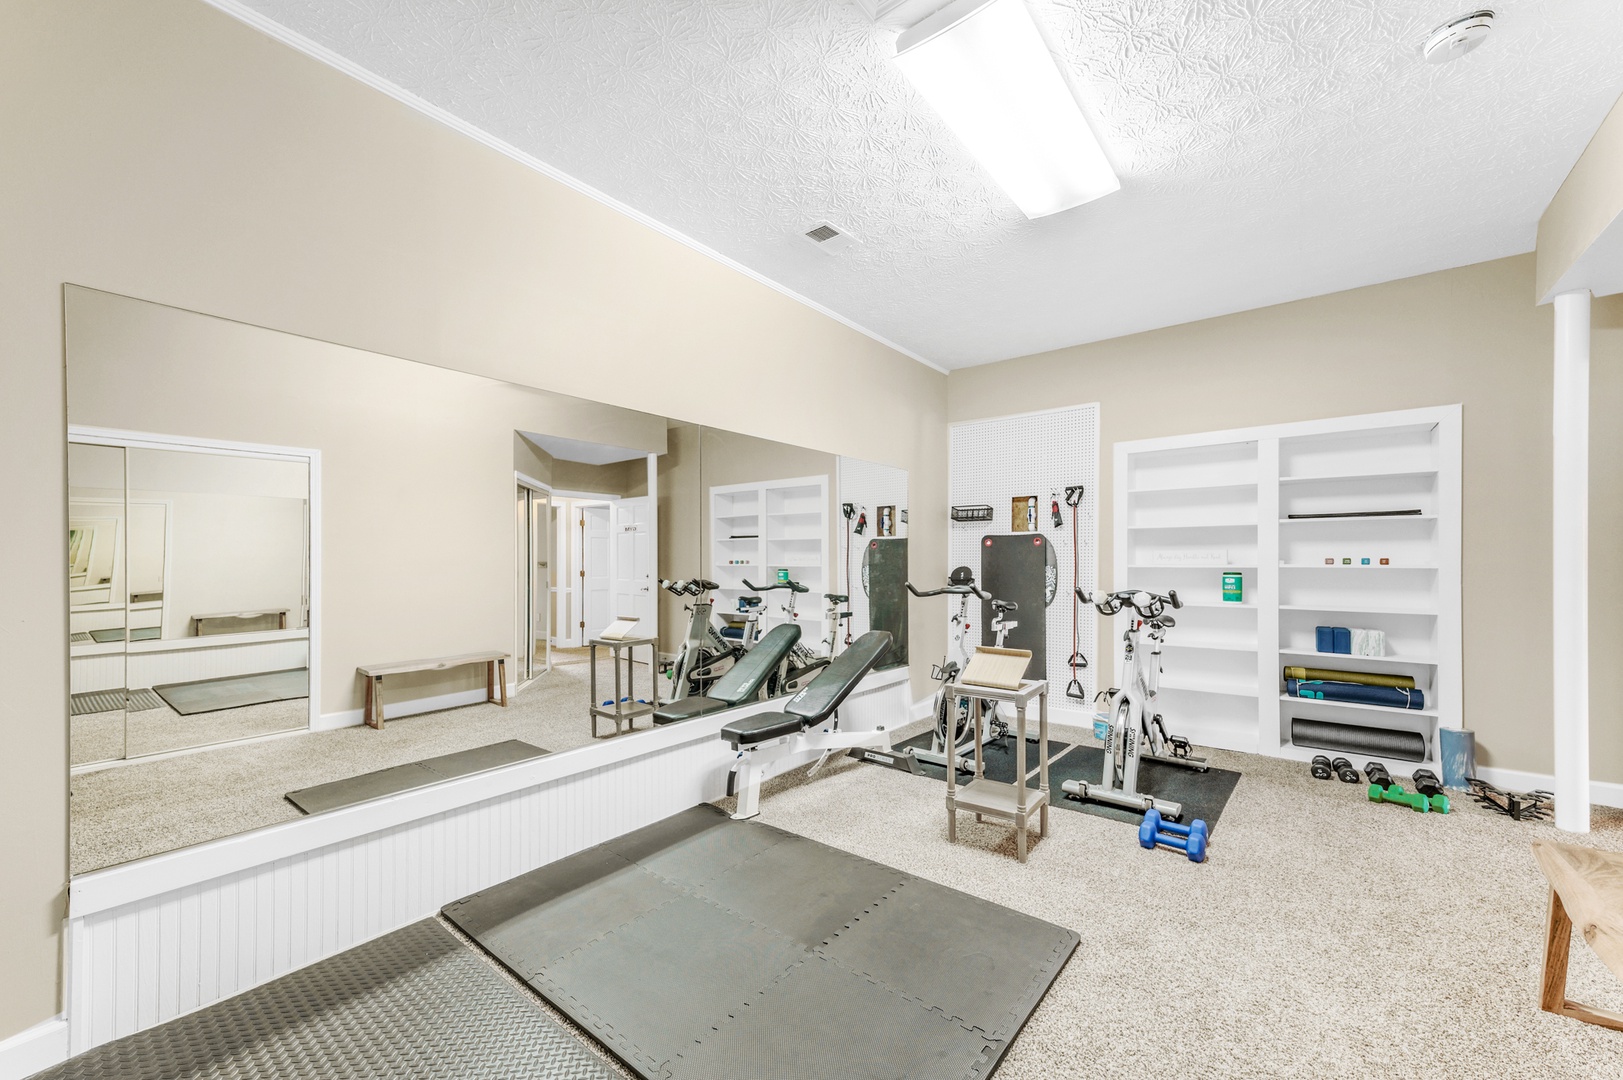 Blue Ridge Lakeside Chateau- Exercise room with equipment and mats